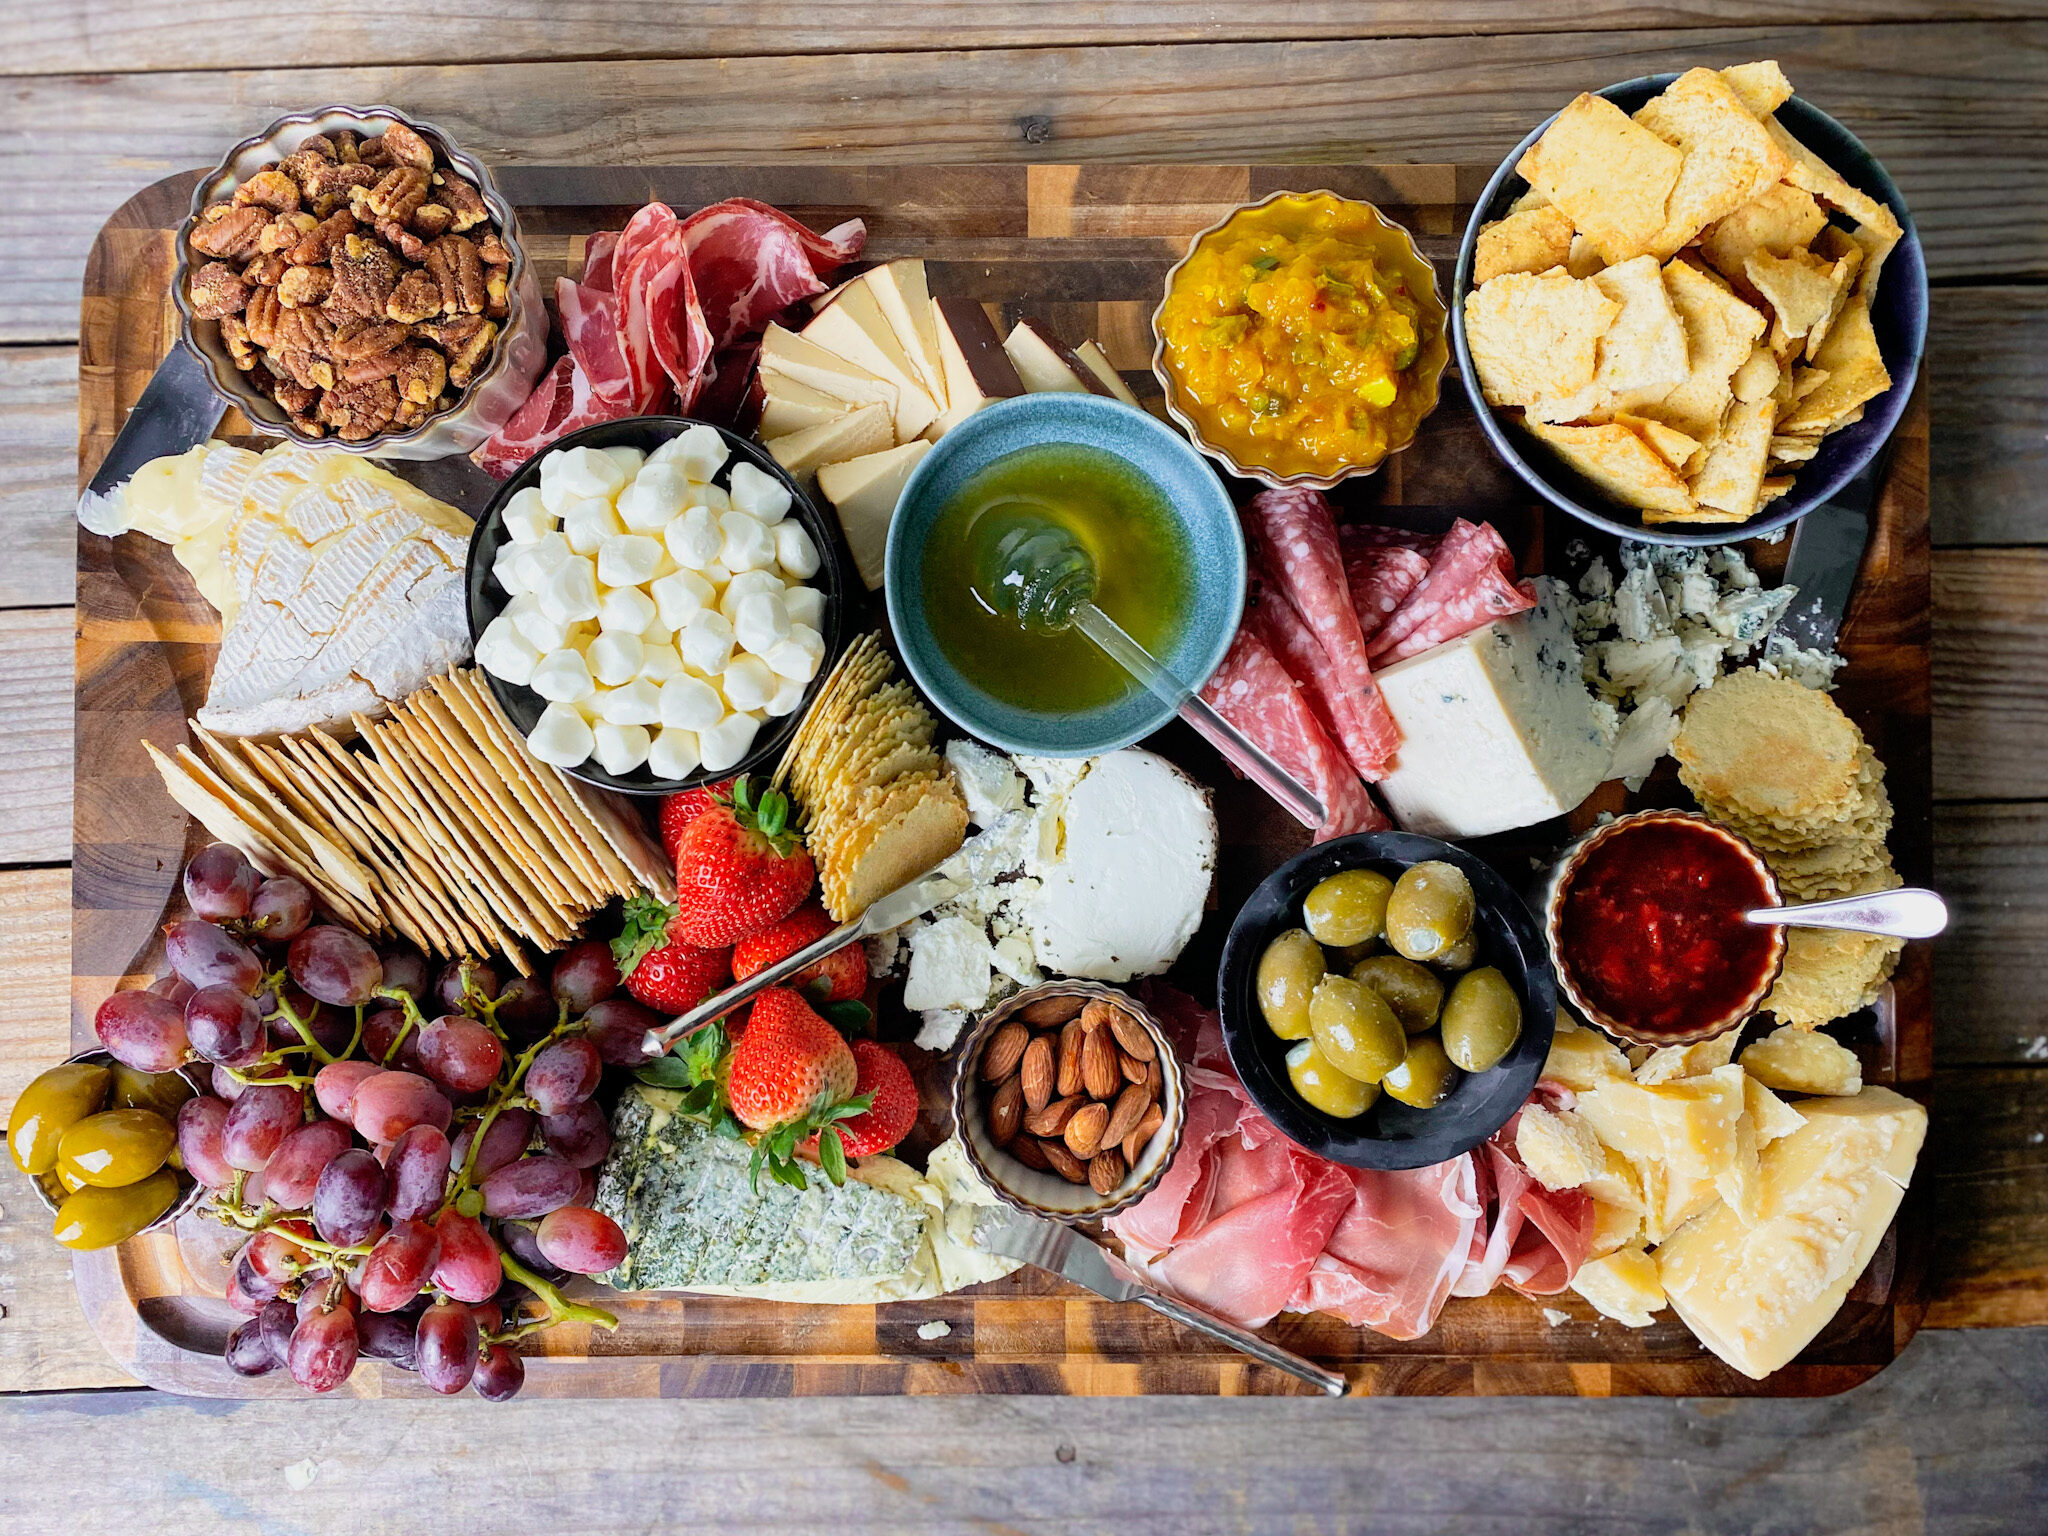 Large Charcuterie board with grapes, strawberries, meats and cheeses, olives, crackers honey, nuts and chutney.